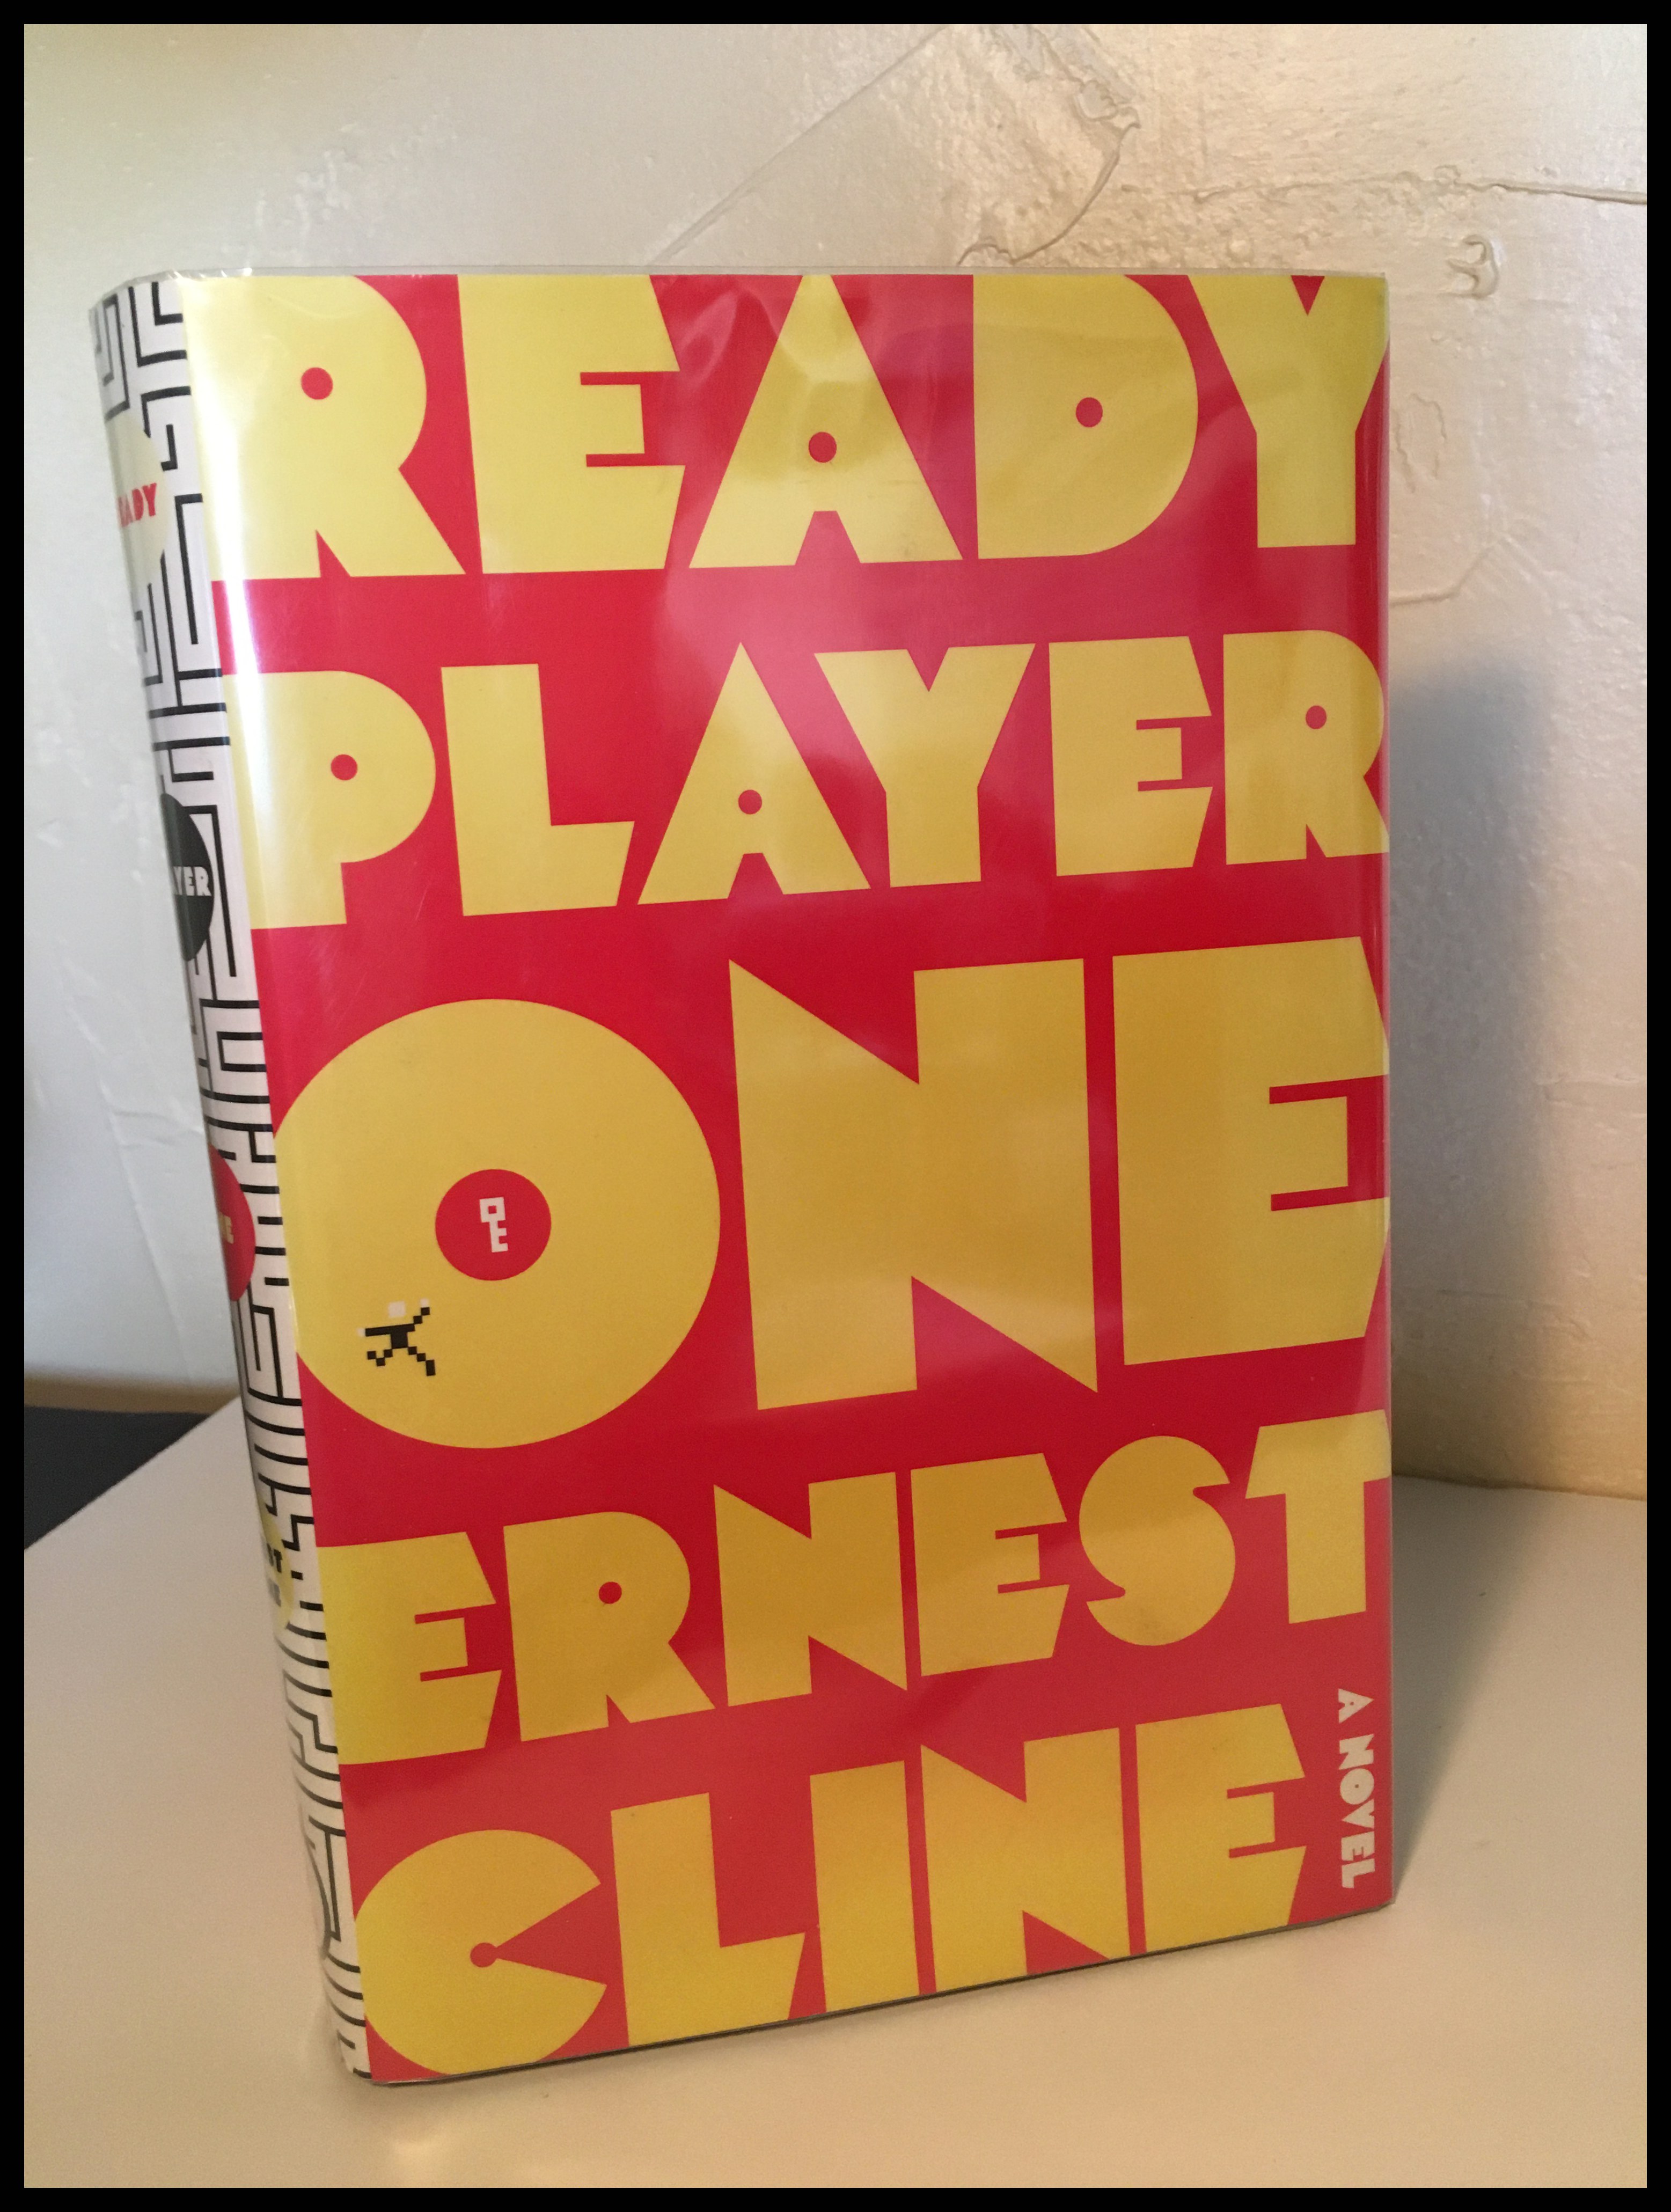 Ready Player One Ernest Cline First Edition Signed Rare Book